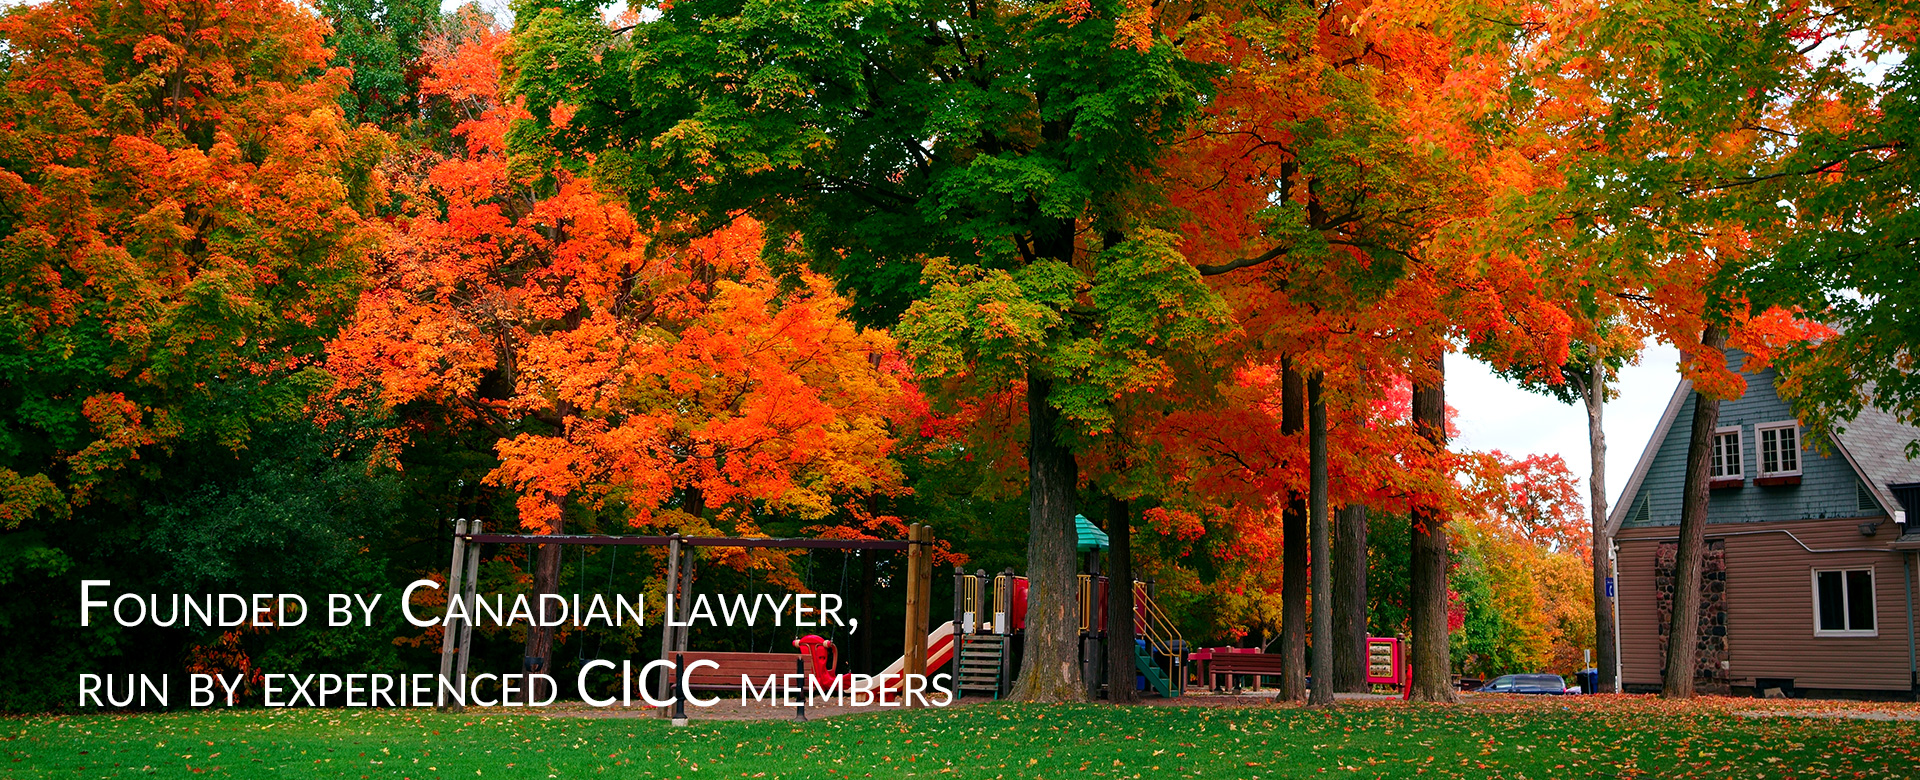 Founded by Canadian Lawyer, Run By Experienced CICC Members